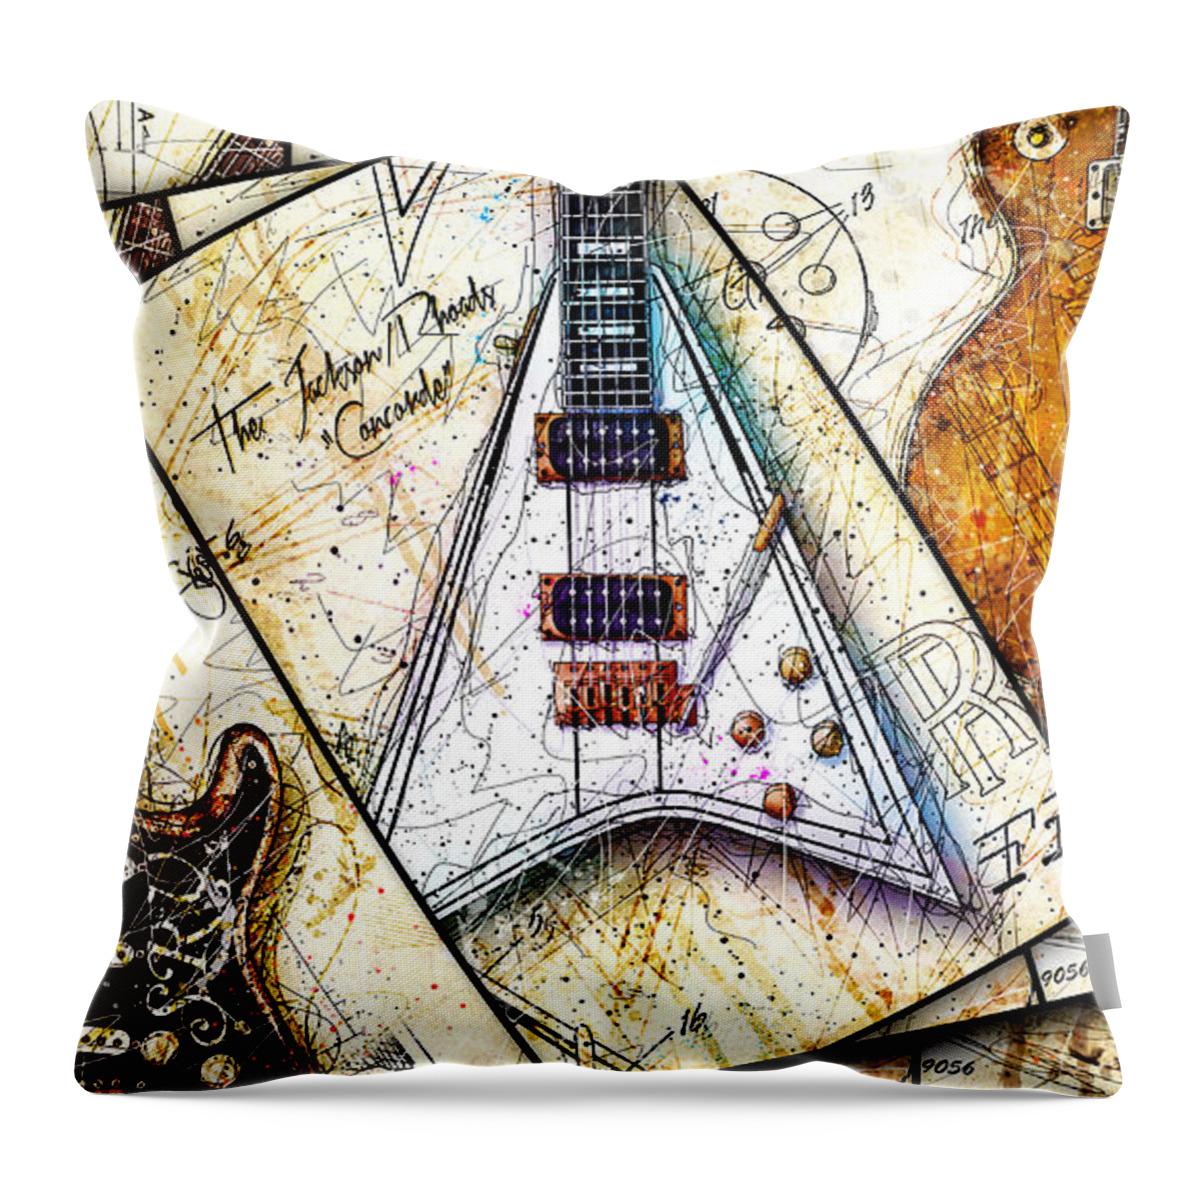 Guitar Throw Pillow featuring the digital art Iconic Guitars Panel 1 by Gary Bodnar